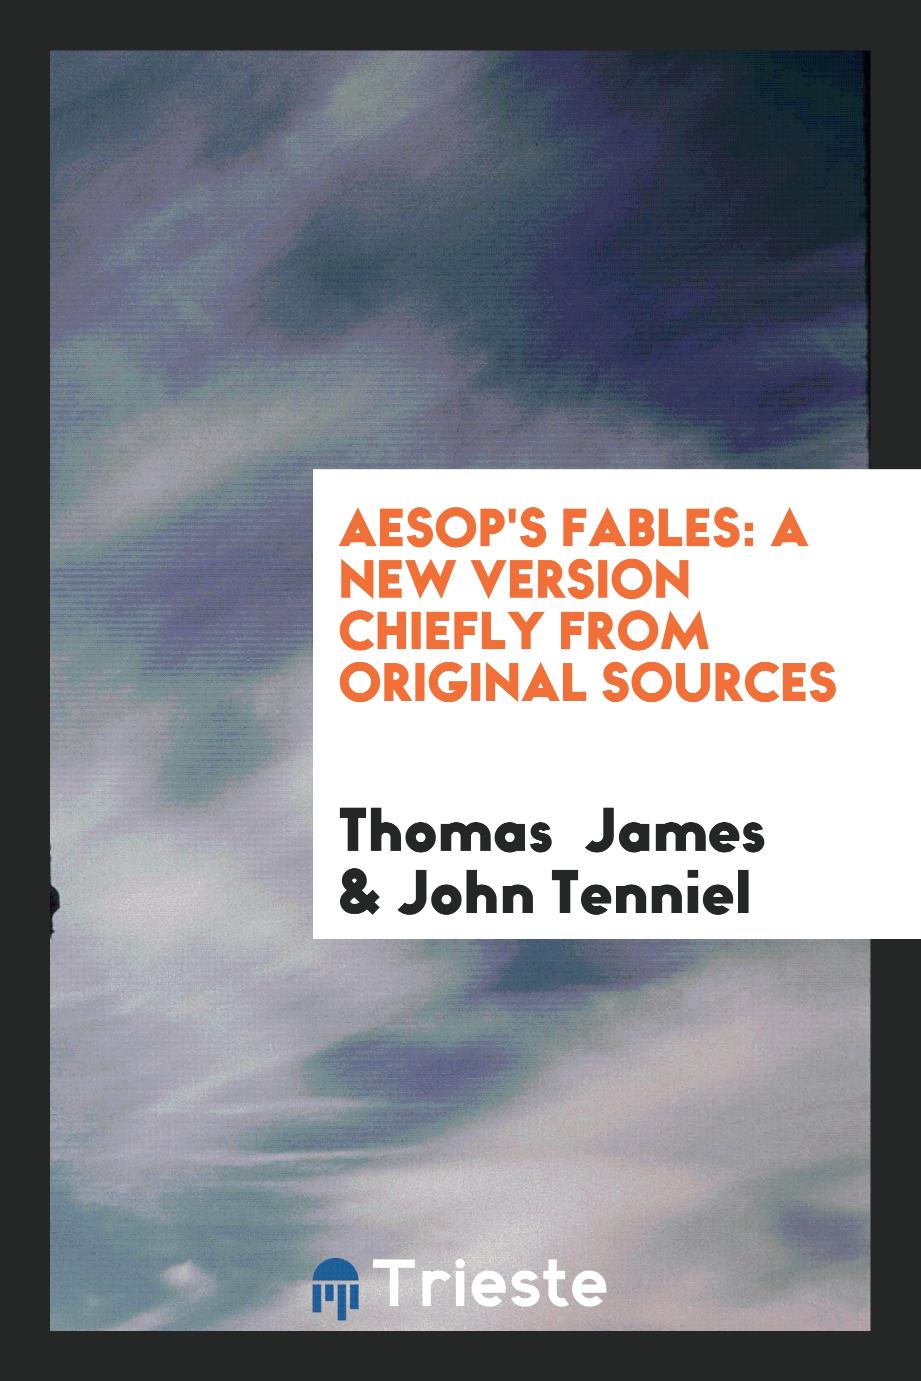 Aesop's Fables: A New Version Chiefly from Original Sources